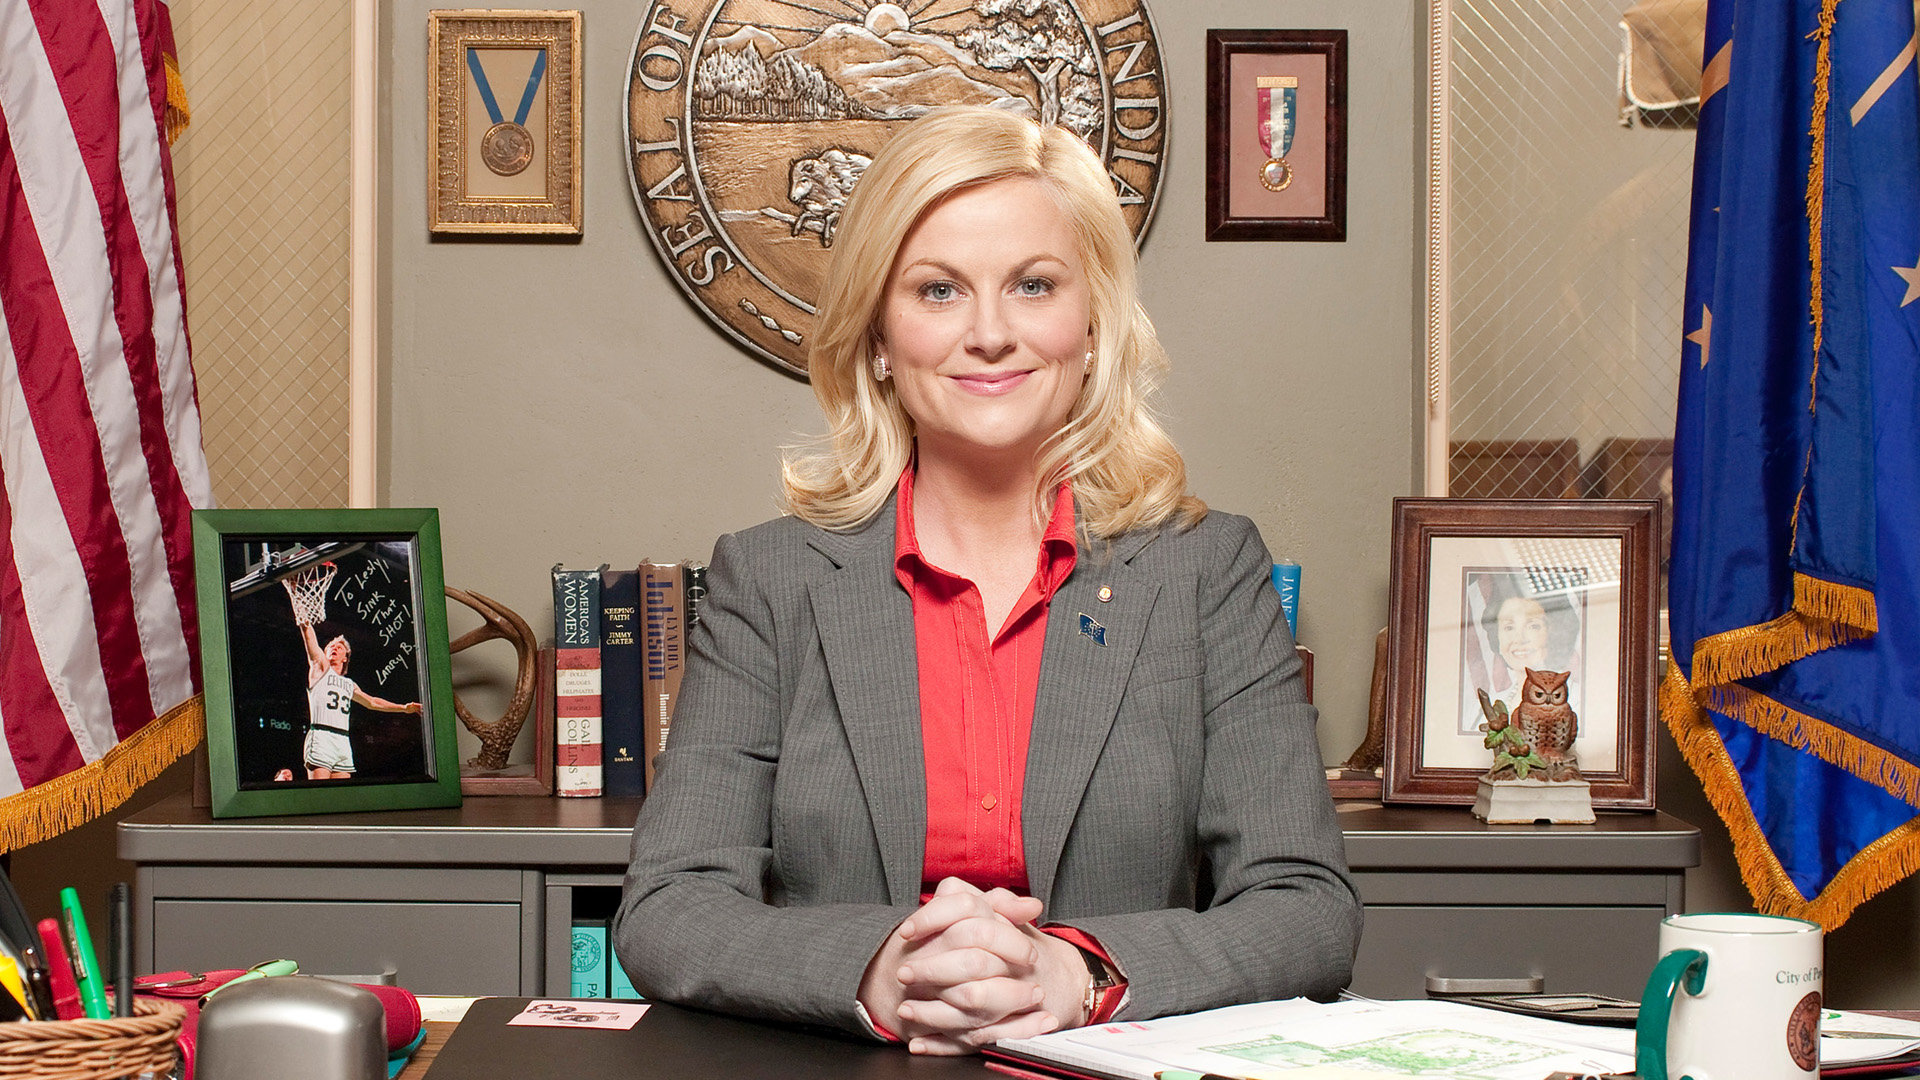 Parks And Recreation wallpapers 1920x1080 Full HD (1080p) desktop backgrounds1920 x 1080